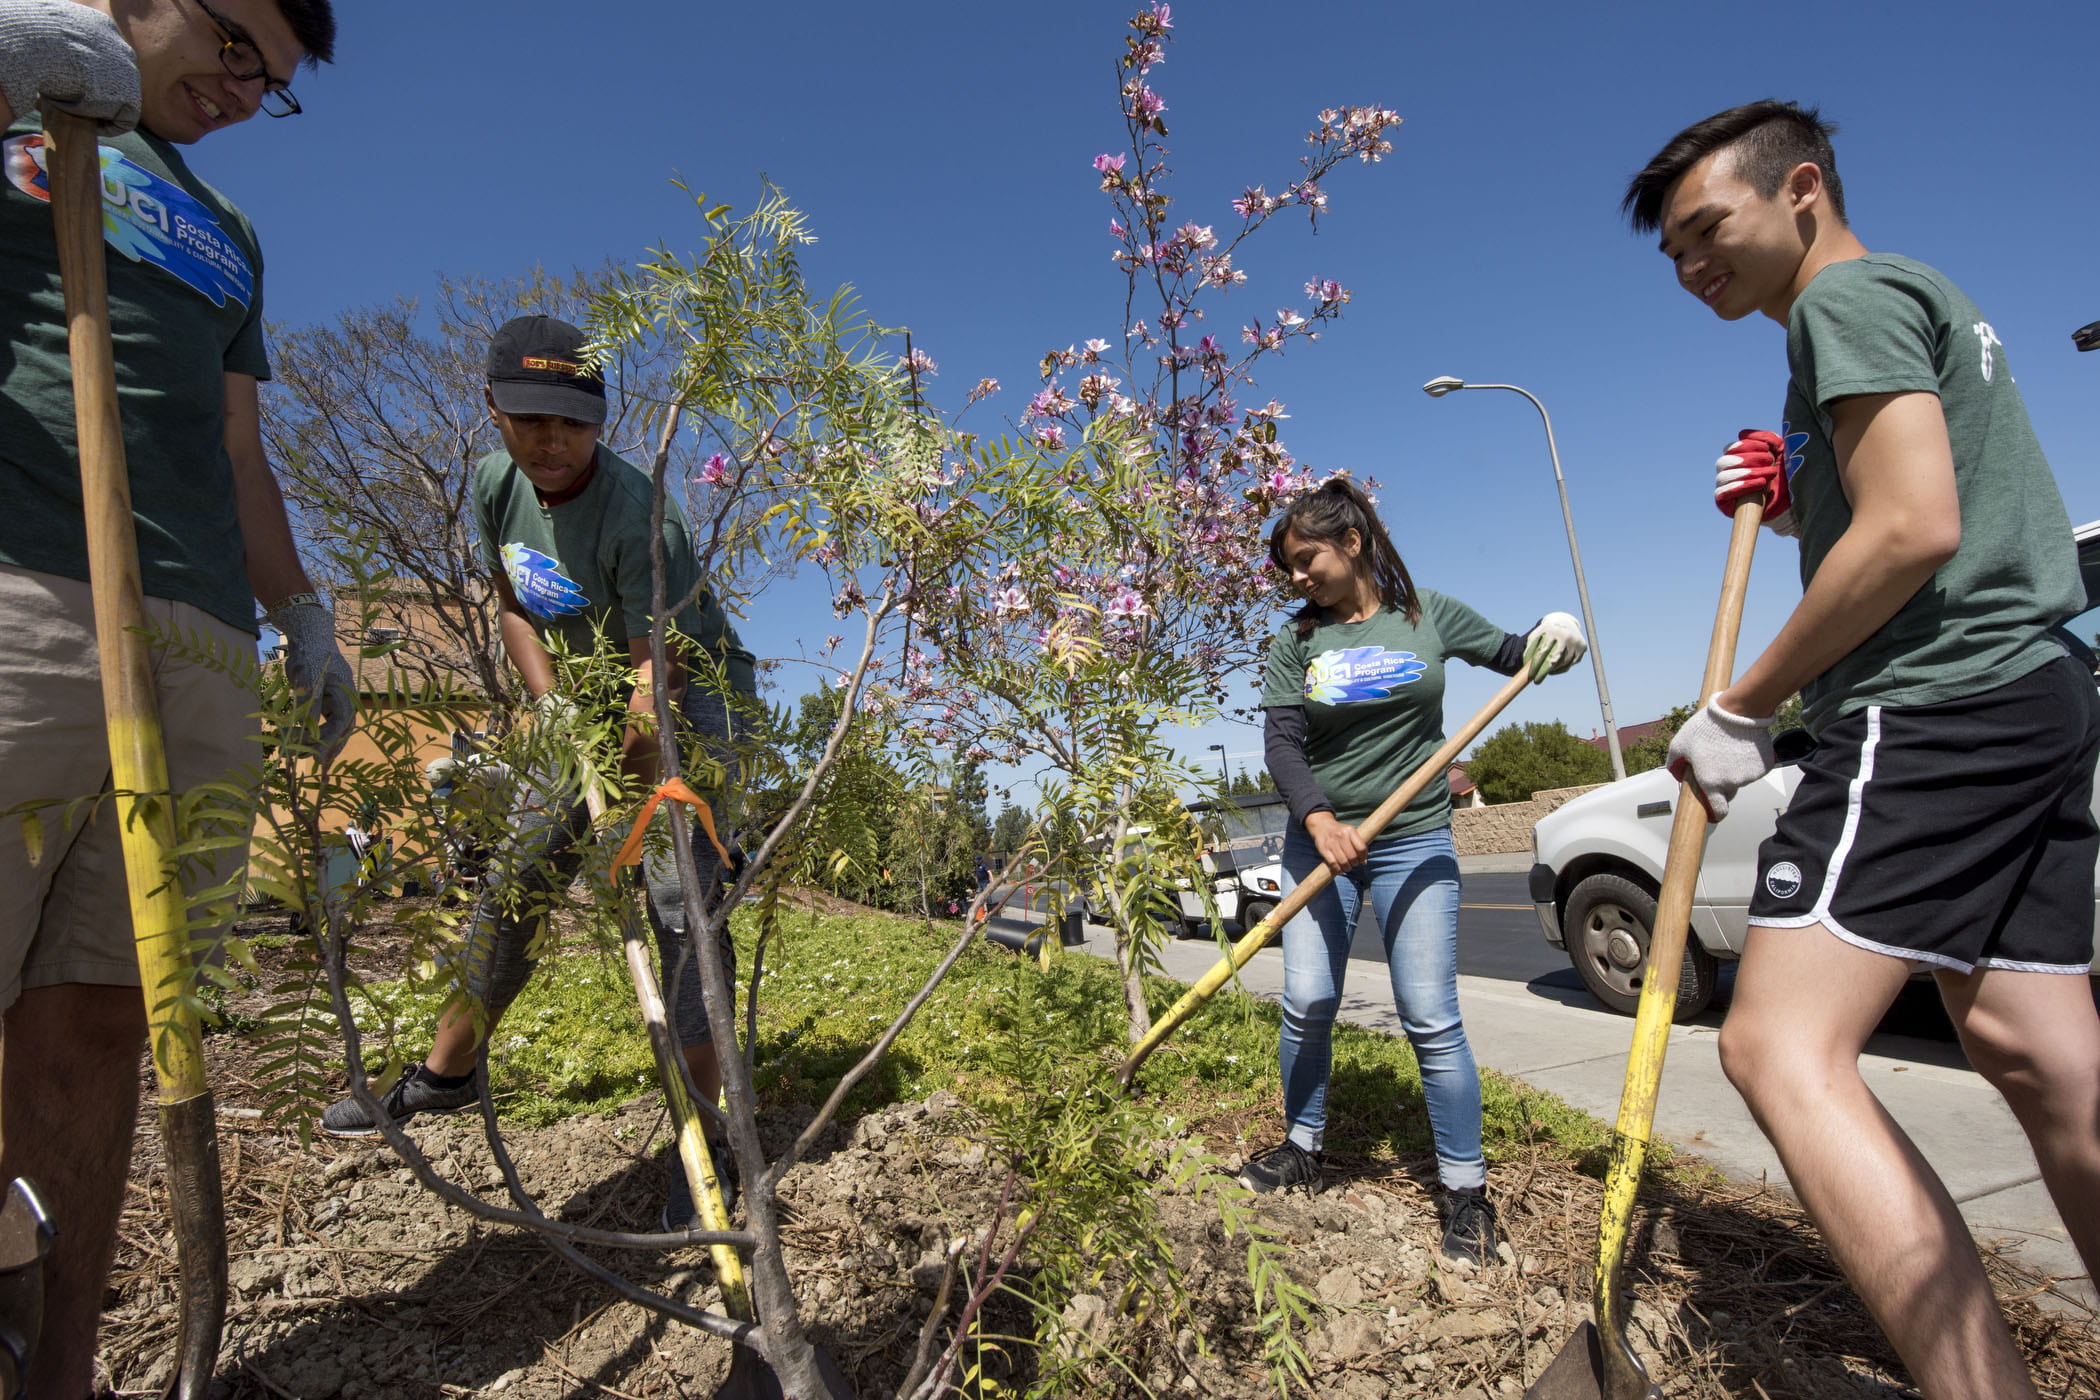 Campus housing and student volunteers plant various environmentally-friendly trees and ground cover in Palo Verde housing at UCI during Earth Week 2018.